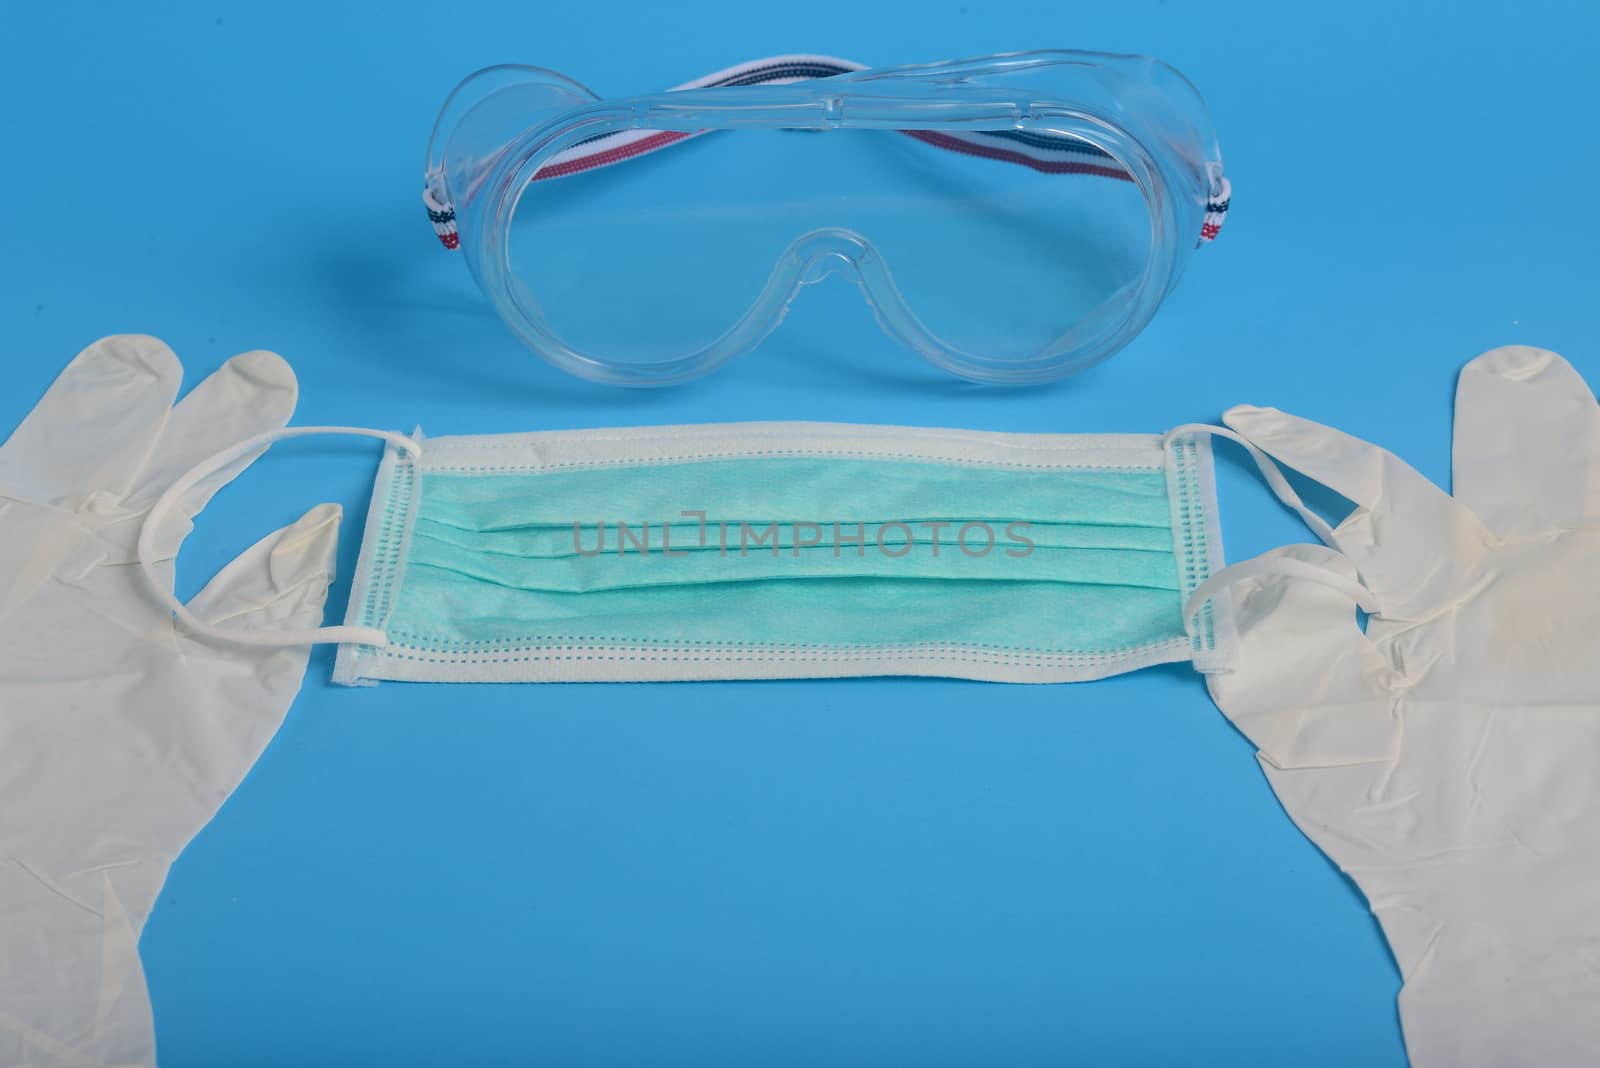 Disposable Hygienic Mask to cover the mouth and nose, transparent plastic laboratory glasses, glove latex hand examination, Protection concept covid-19